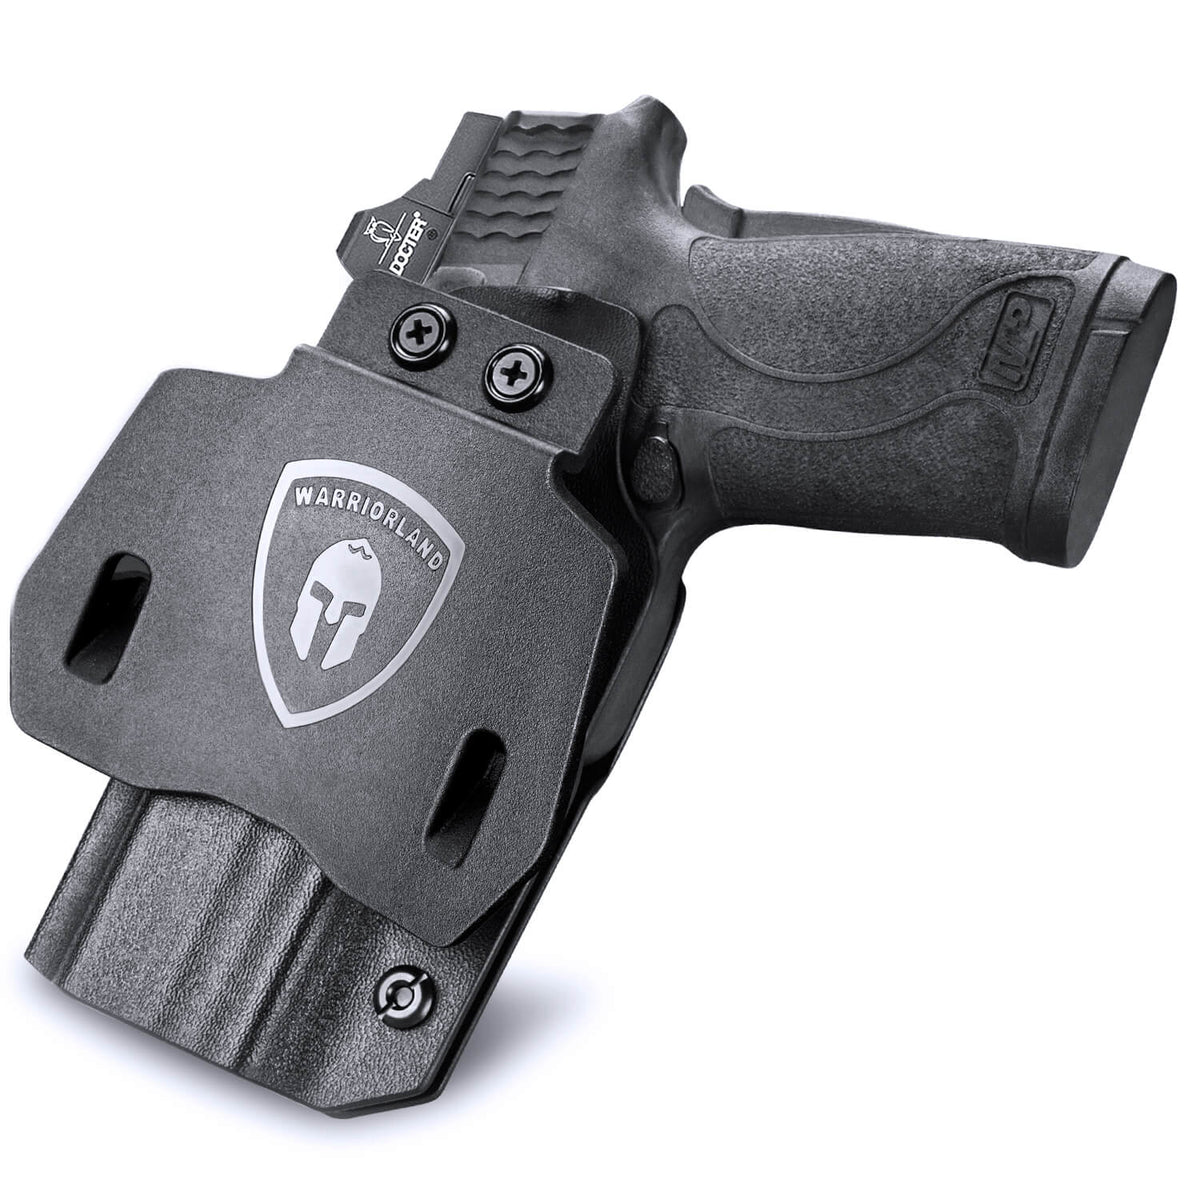 Kydex Holster ARES WML Smith and Wesson Shield Plus 4 Performance Center  TLR-7A Weapon Mounted Light